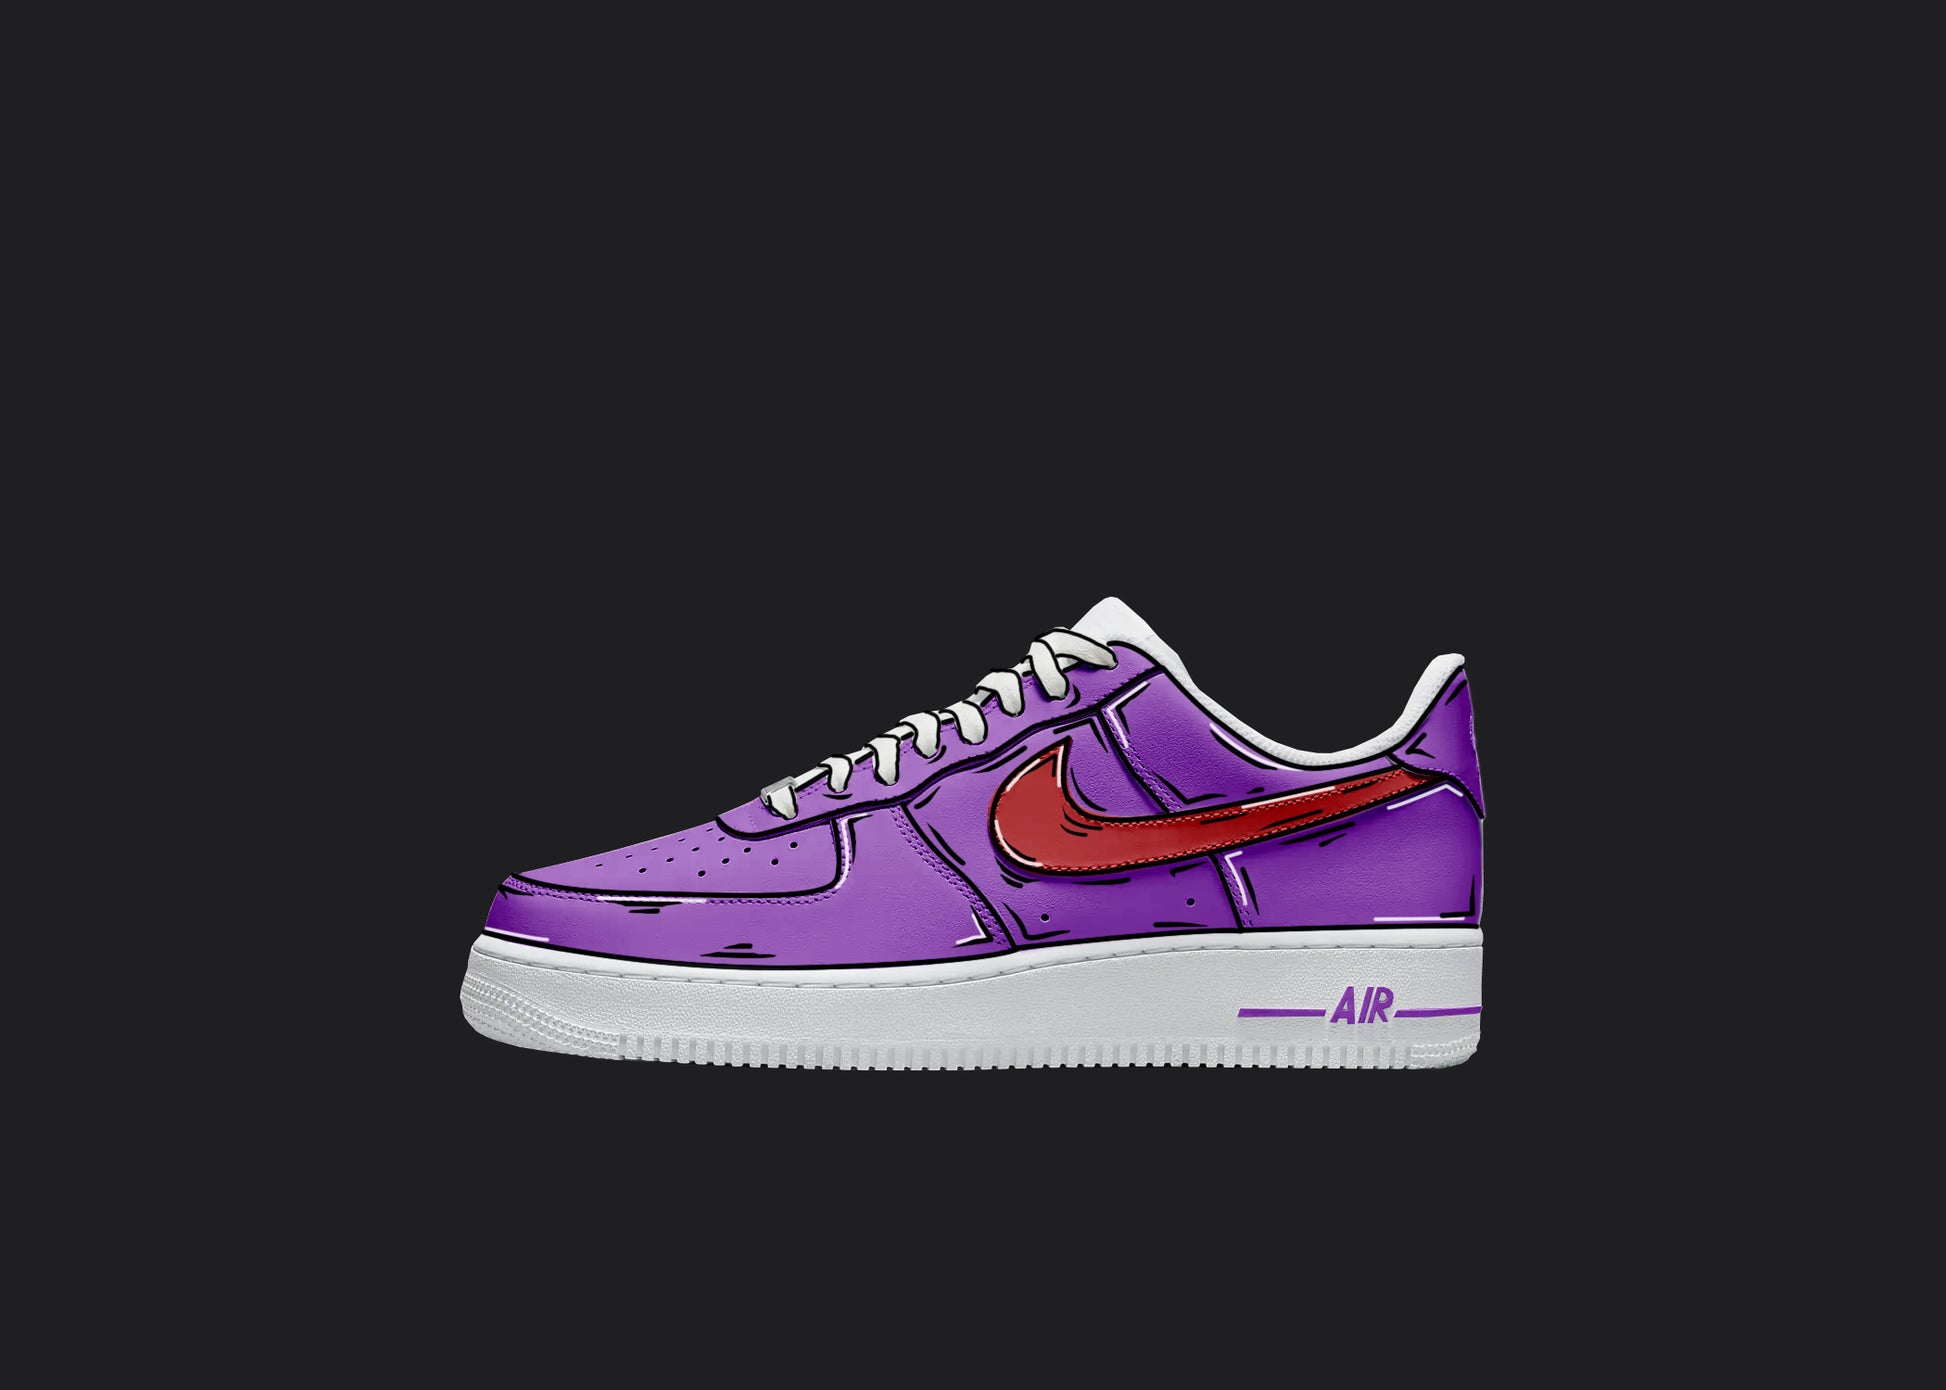 Purple and red cartoon nike custom air force 1s with black and white sketched details